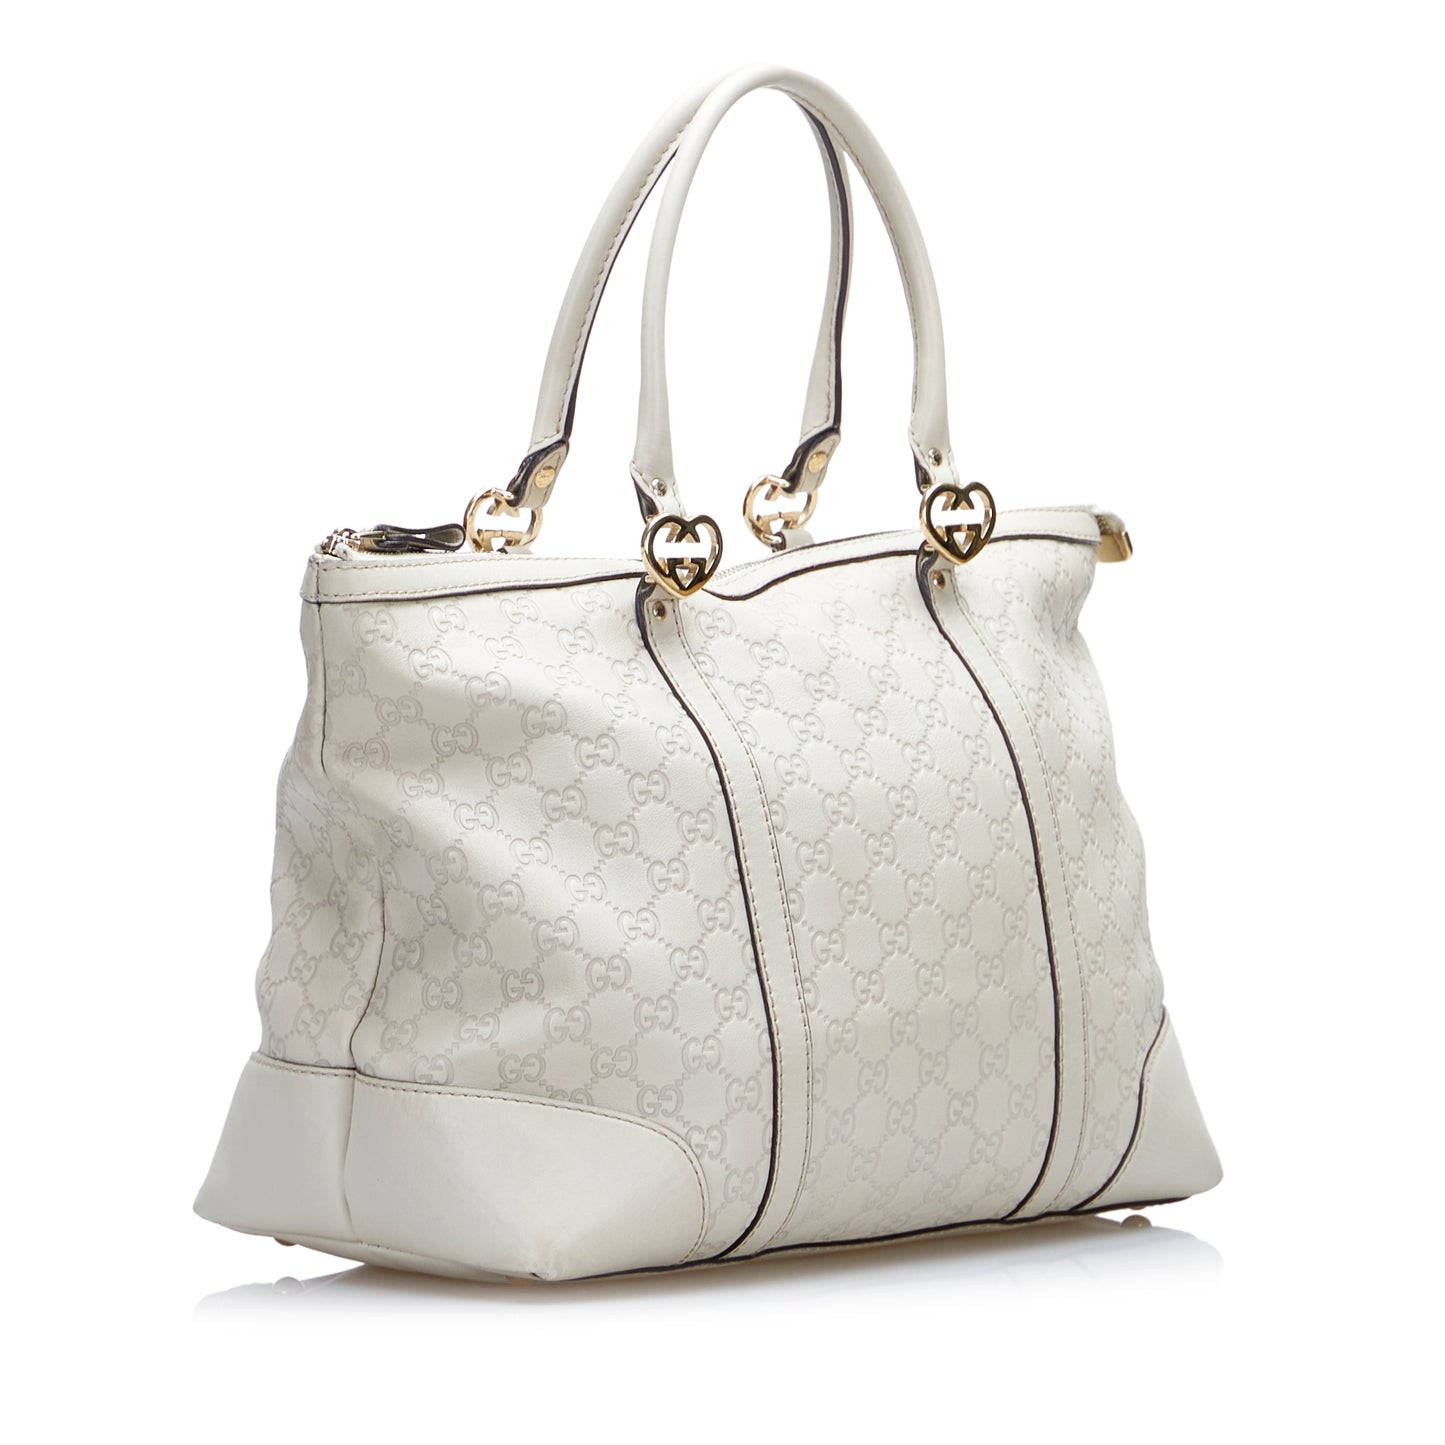 Guccissima Lovely Tote